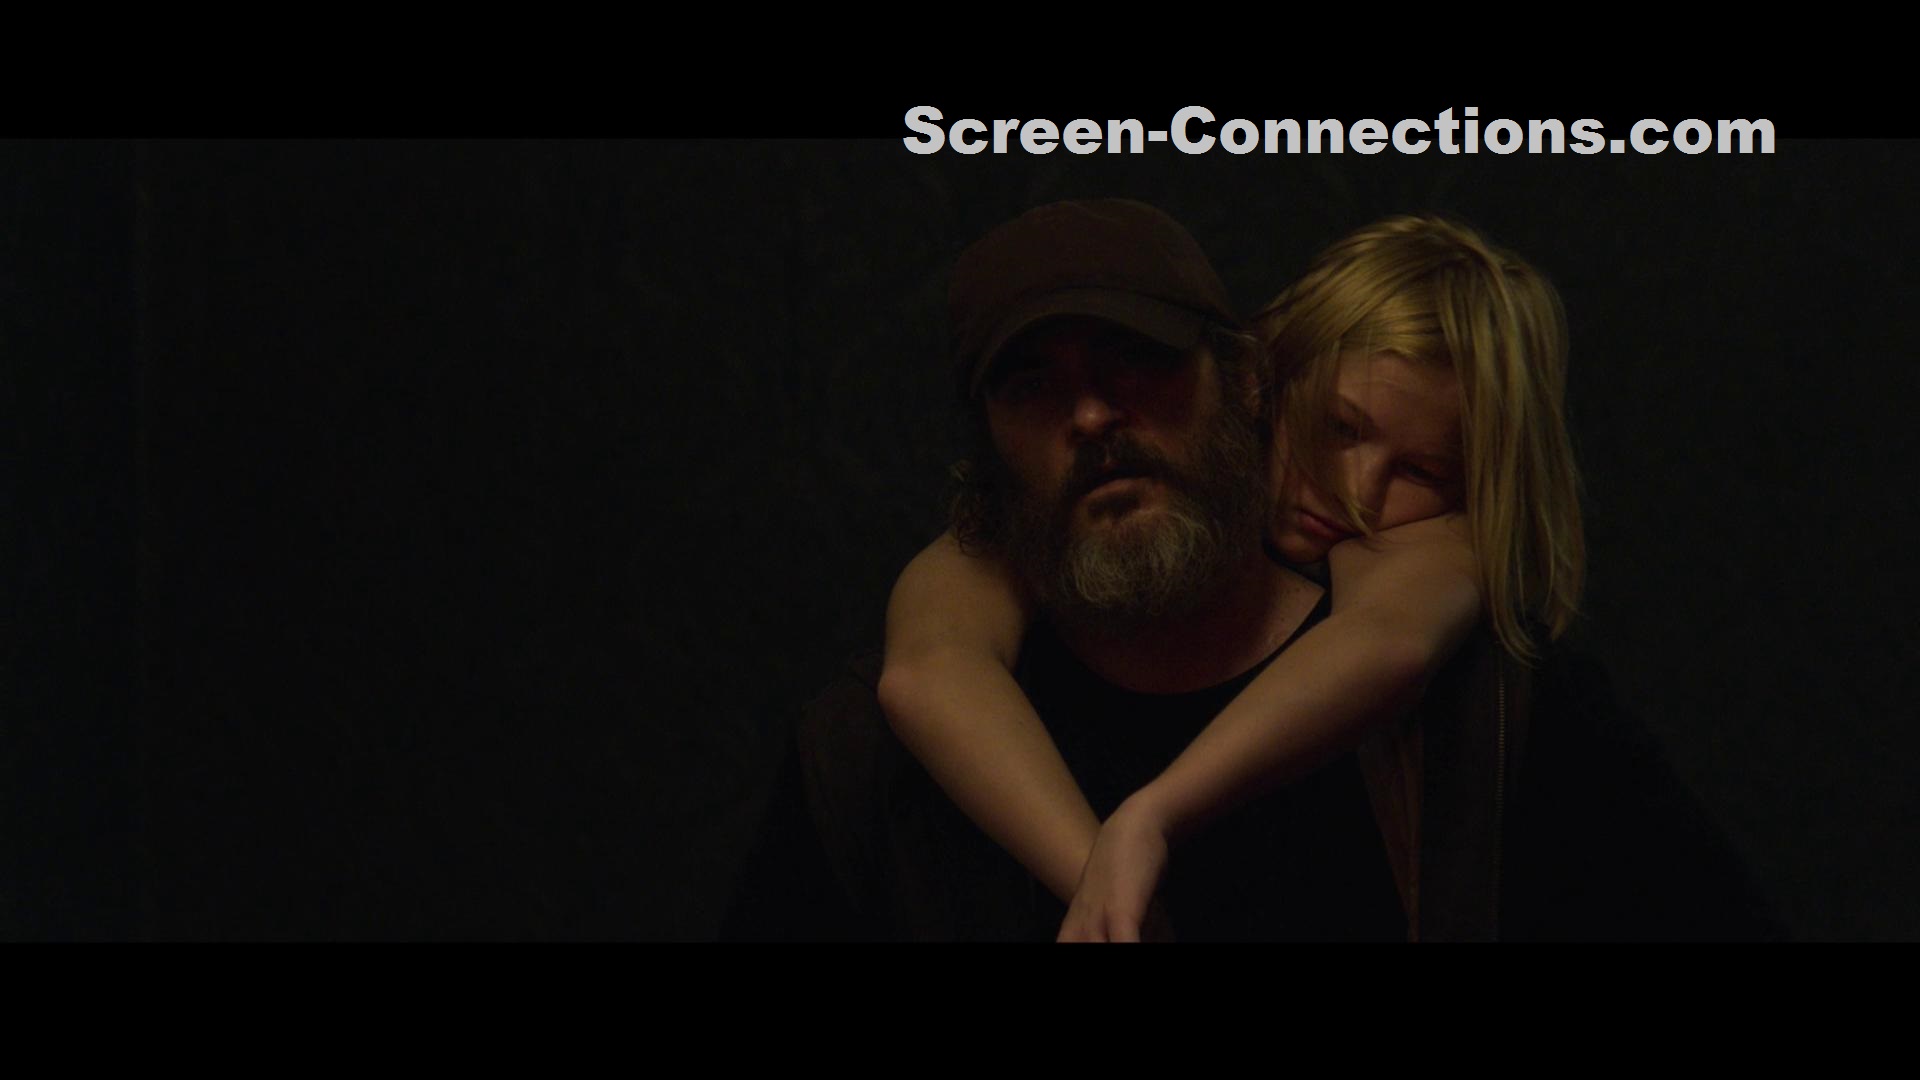 [Blu-Ray Review] ‘You Were Never Really Here’: Now Available On Blu-ray, DVD & Digital From Lionsgate 4